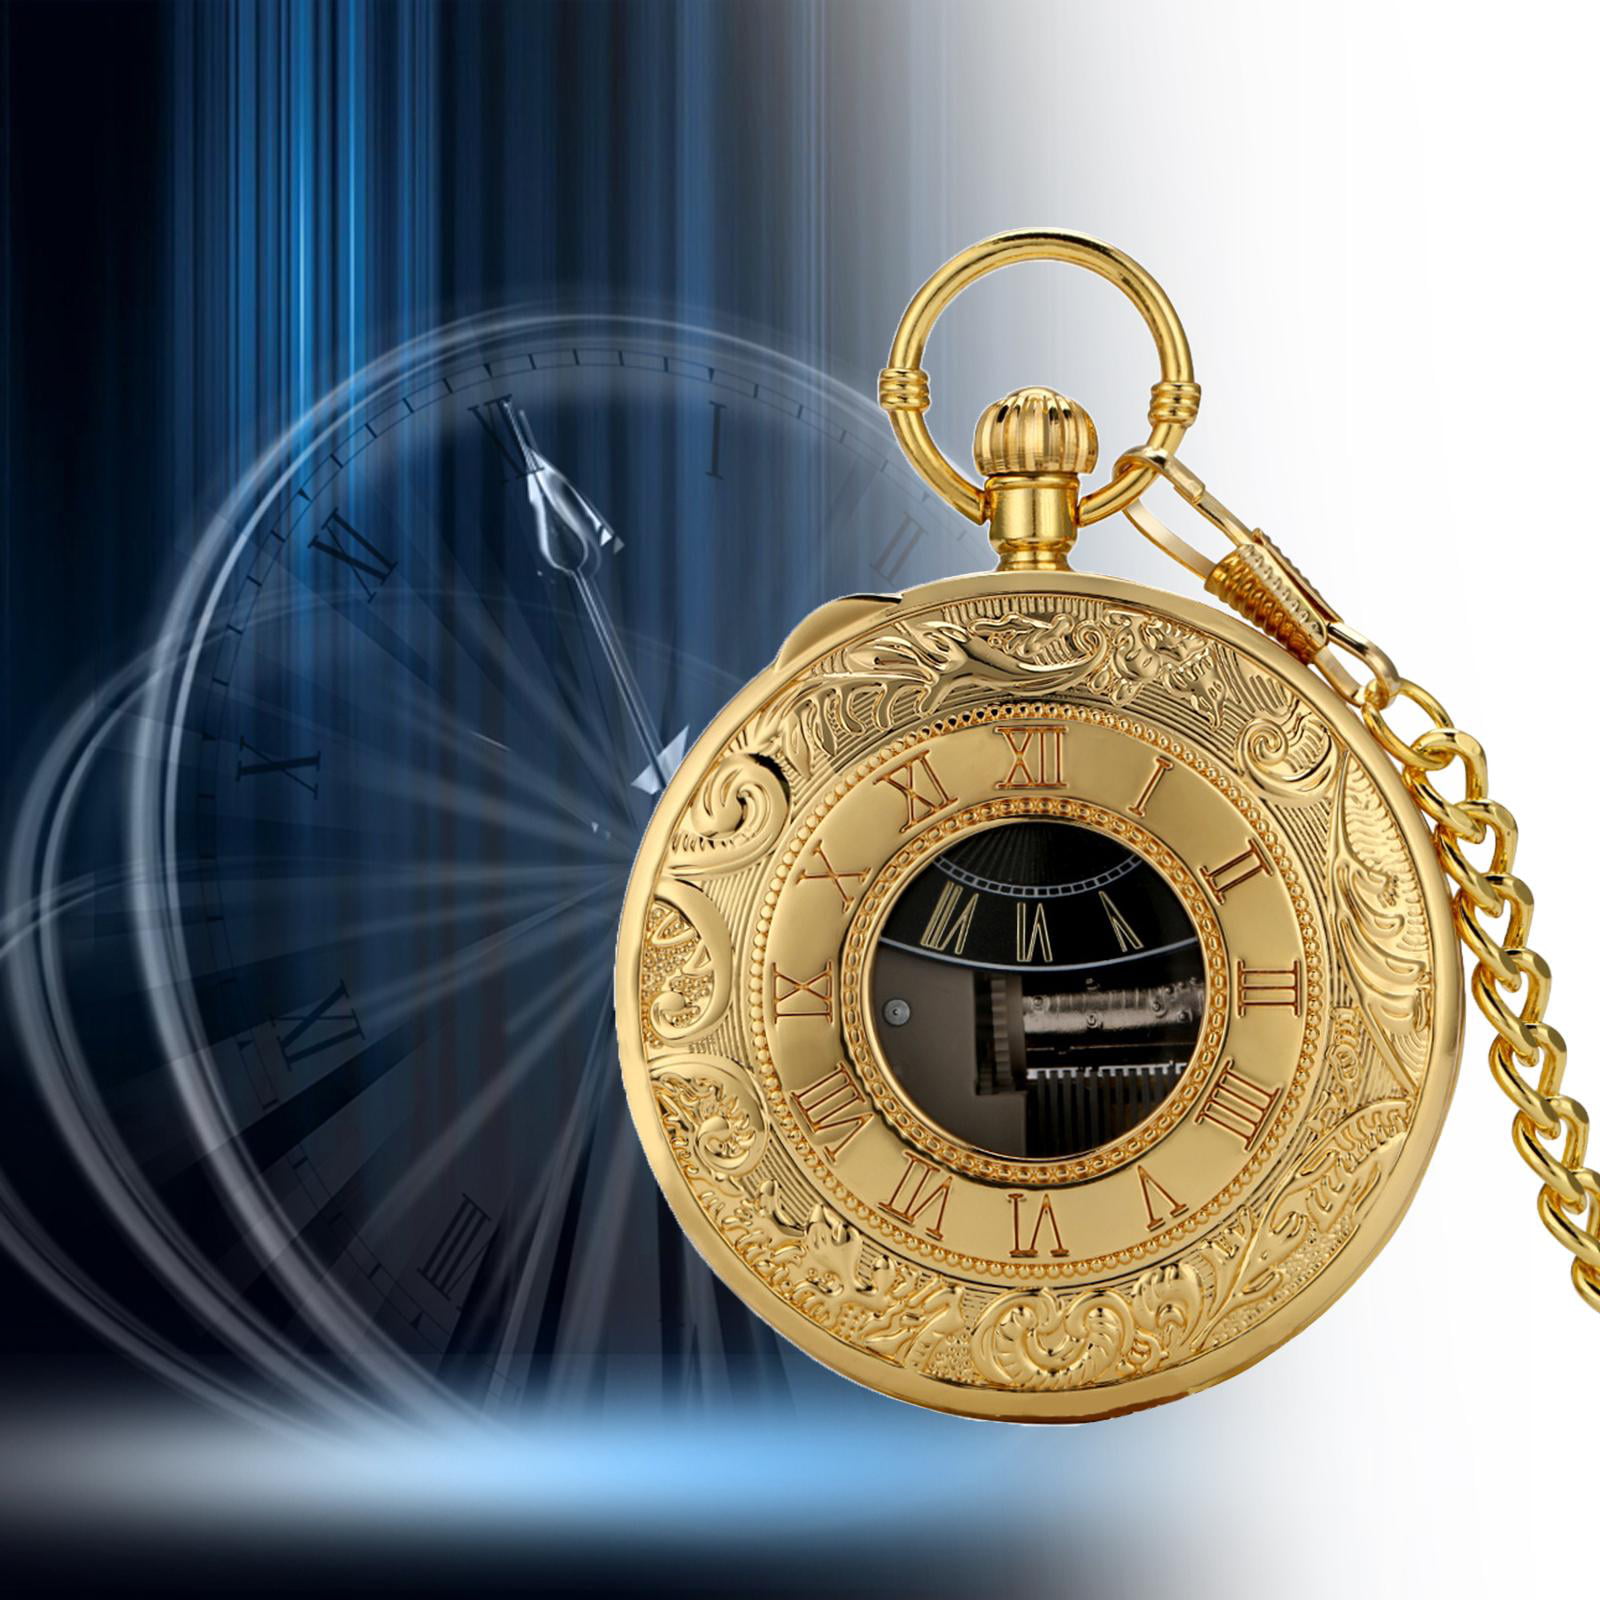 Exquise Gold Musical Movement Pocket Watch Hand Crank Playing Music Watch  Chain Roman Number Carved Clock Happy New Year Gifts - Pocket & Fob Watches  - AliExpress